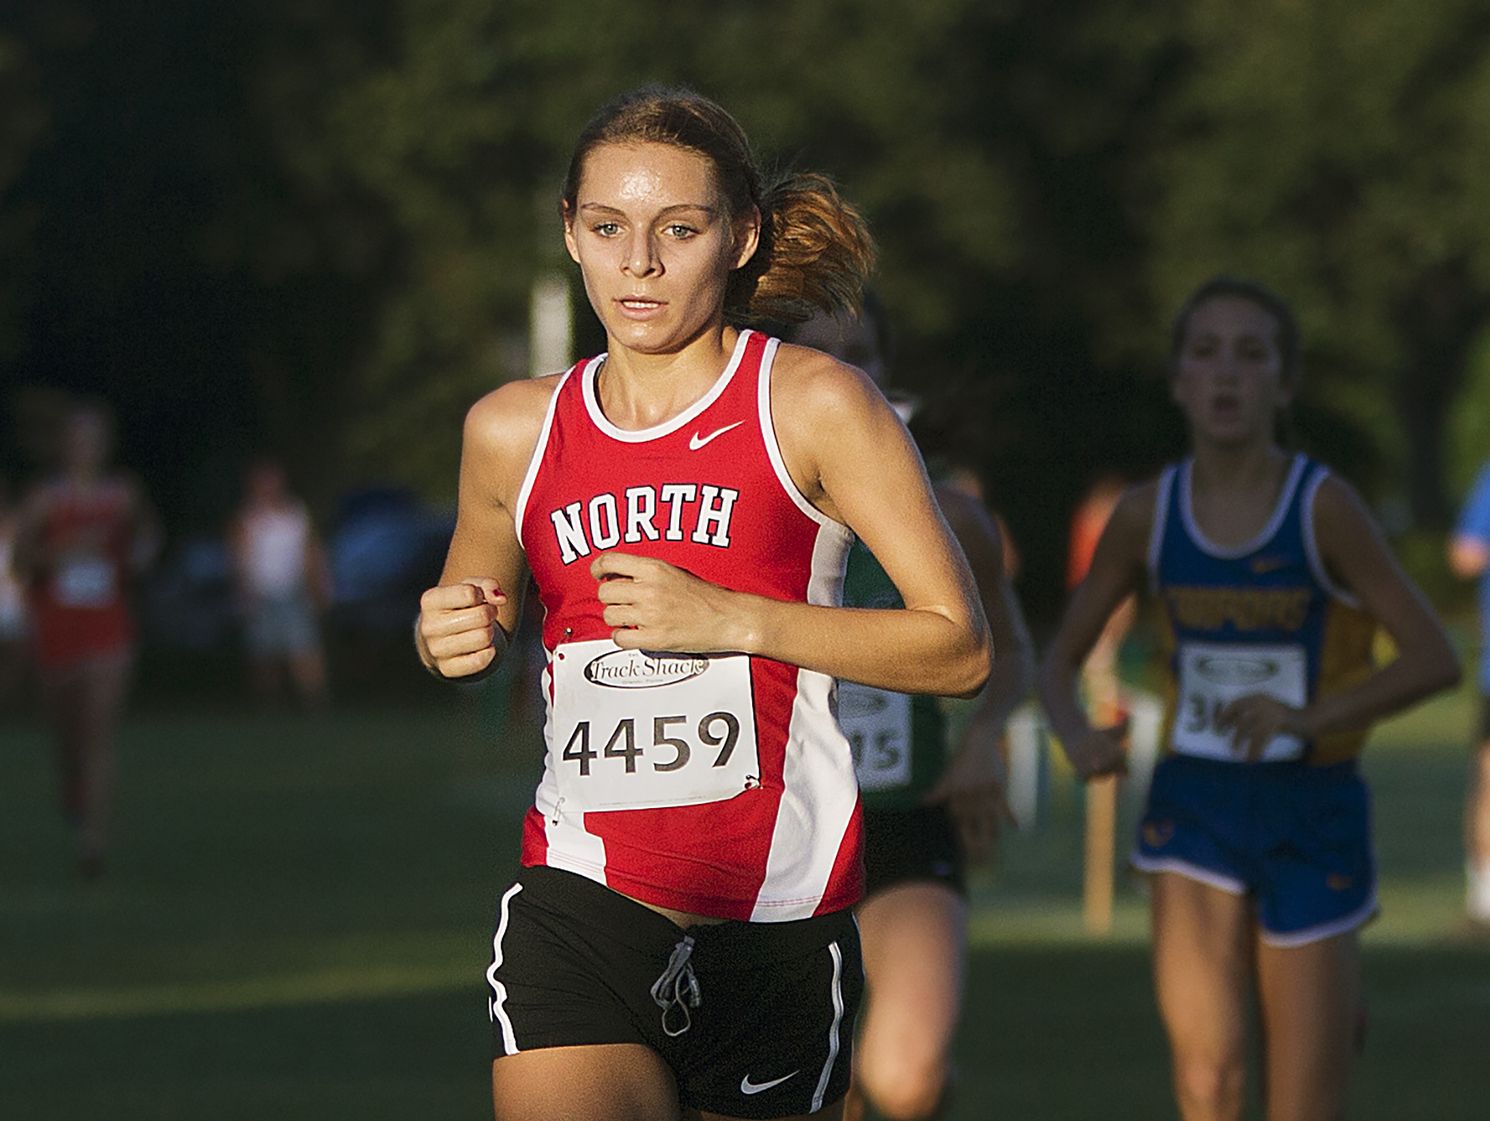 North Fort Myers High School's Kayla Easterly races in the Hoptar Invitational at Veterans Park in Lehigh Acres on Saturday. Easterly finished third.